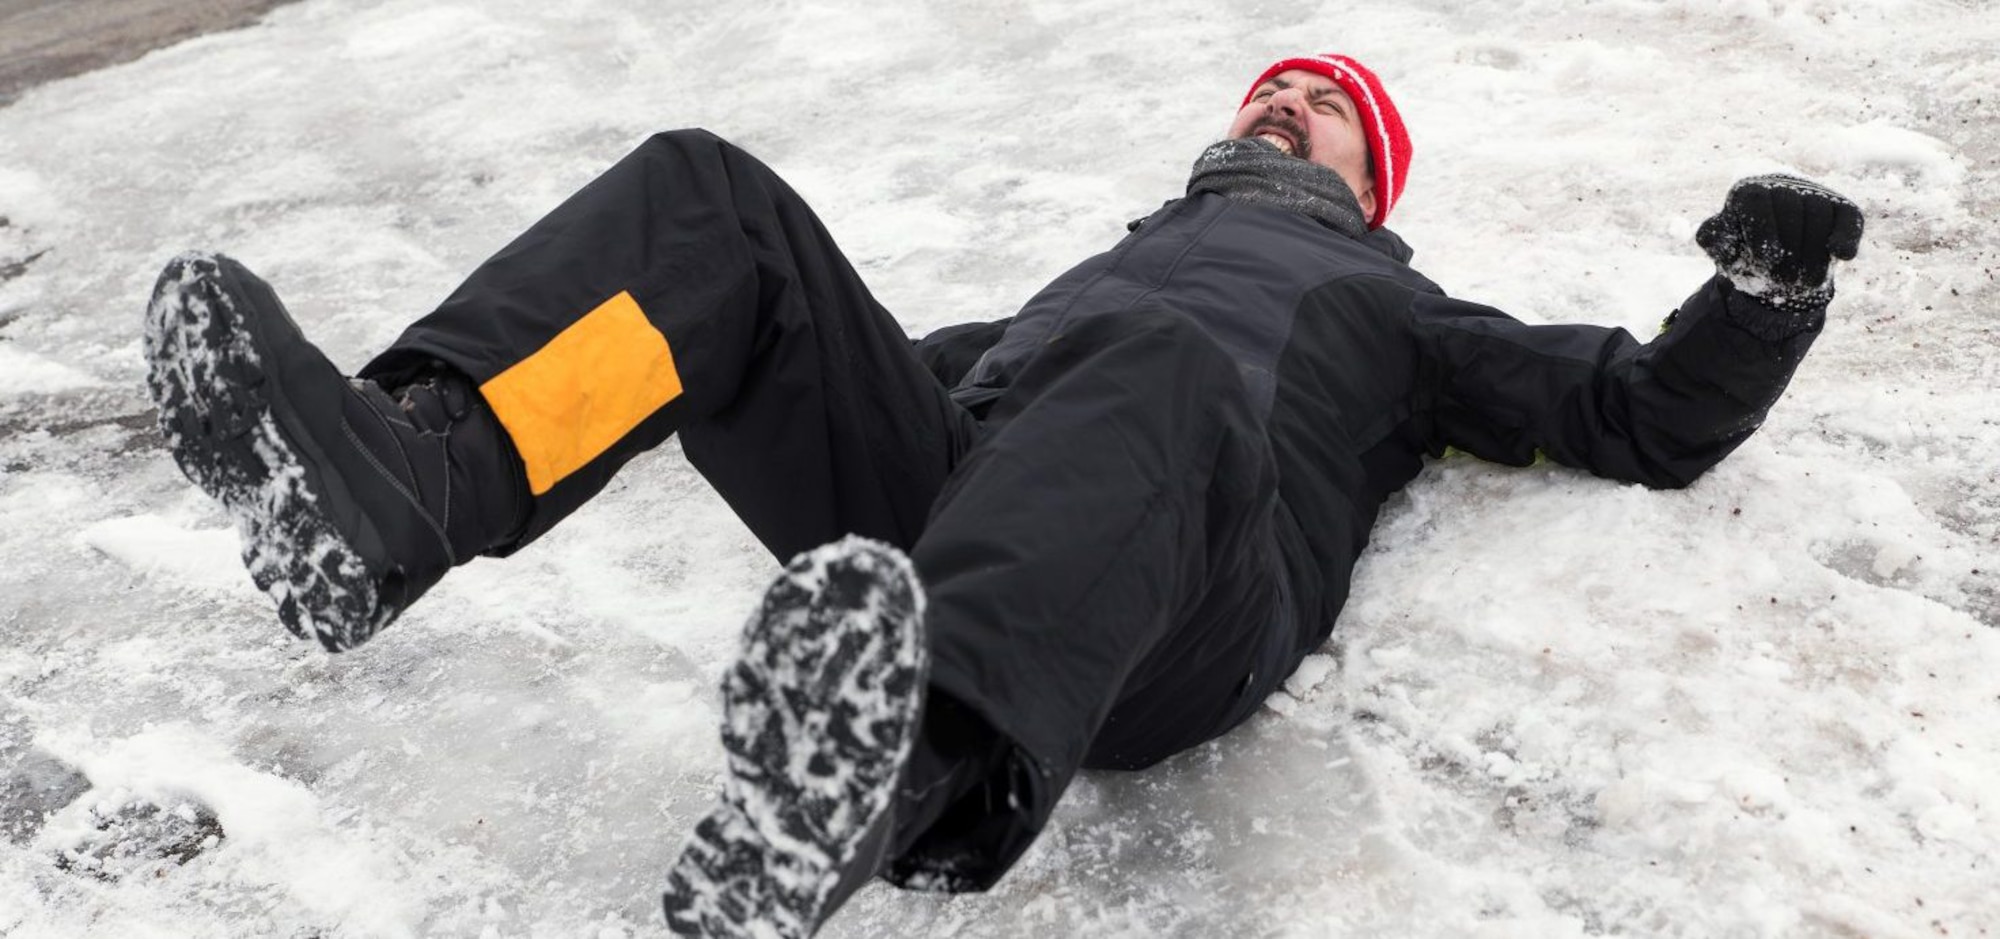 A man, on his back with legs in the air appears to slip on ice and snow